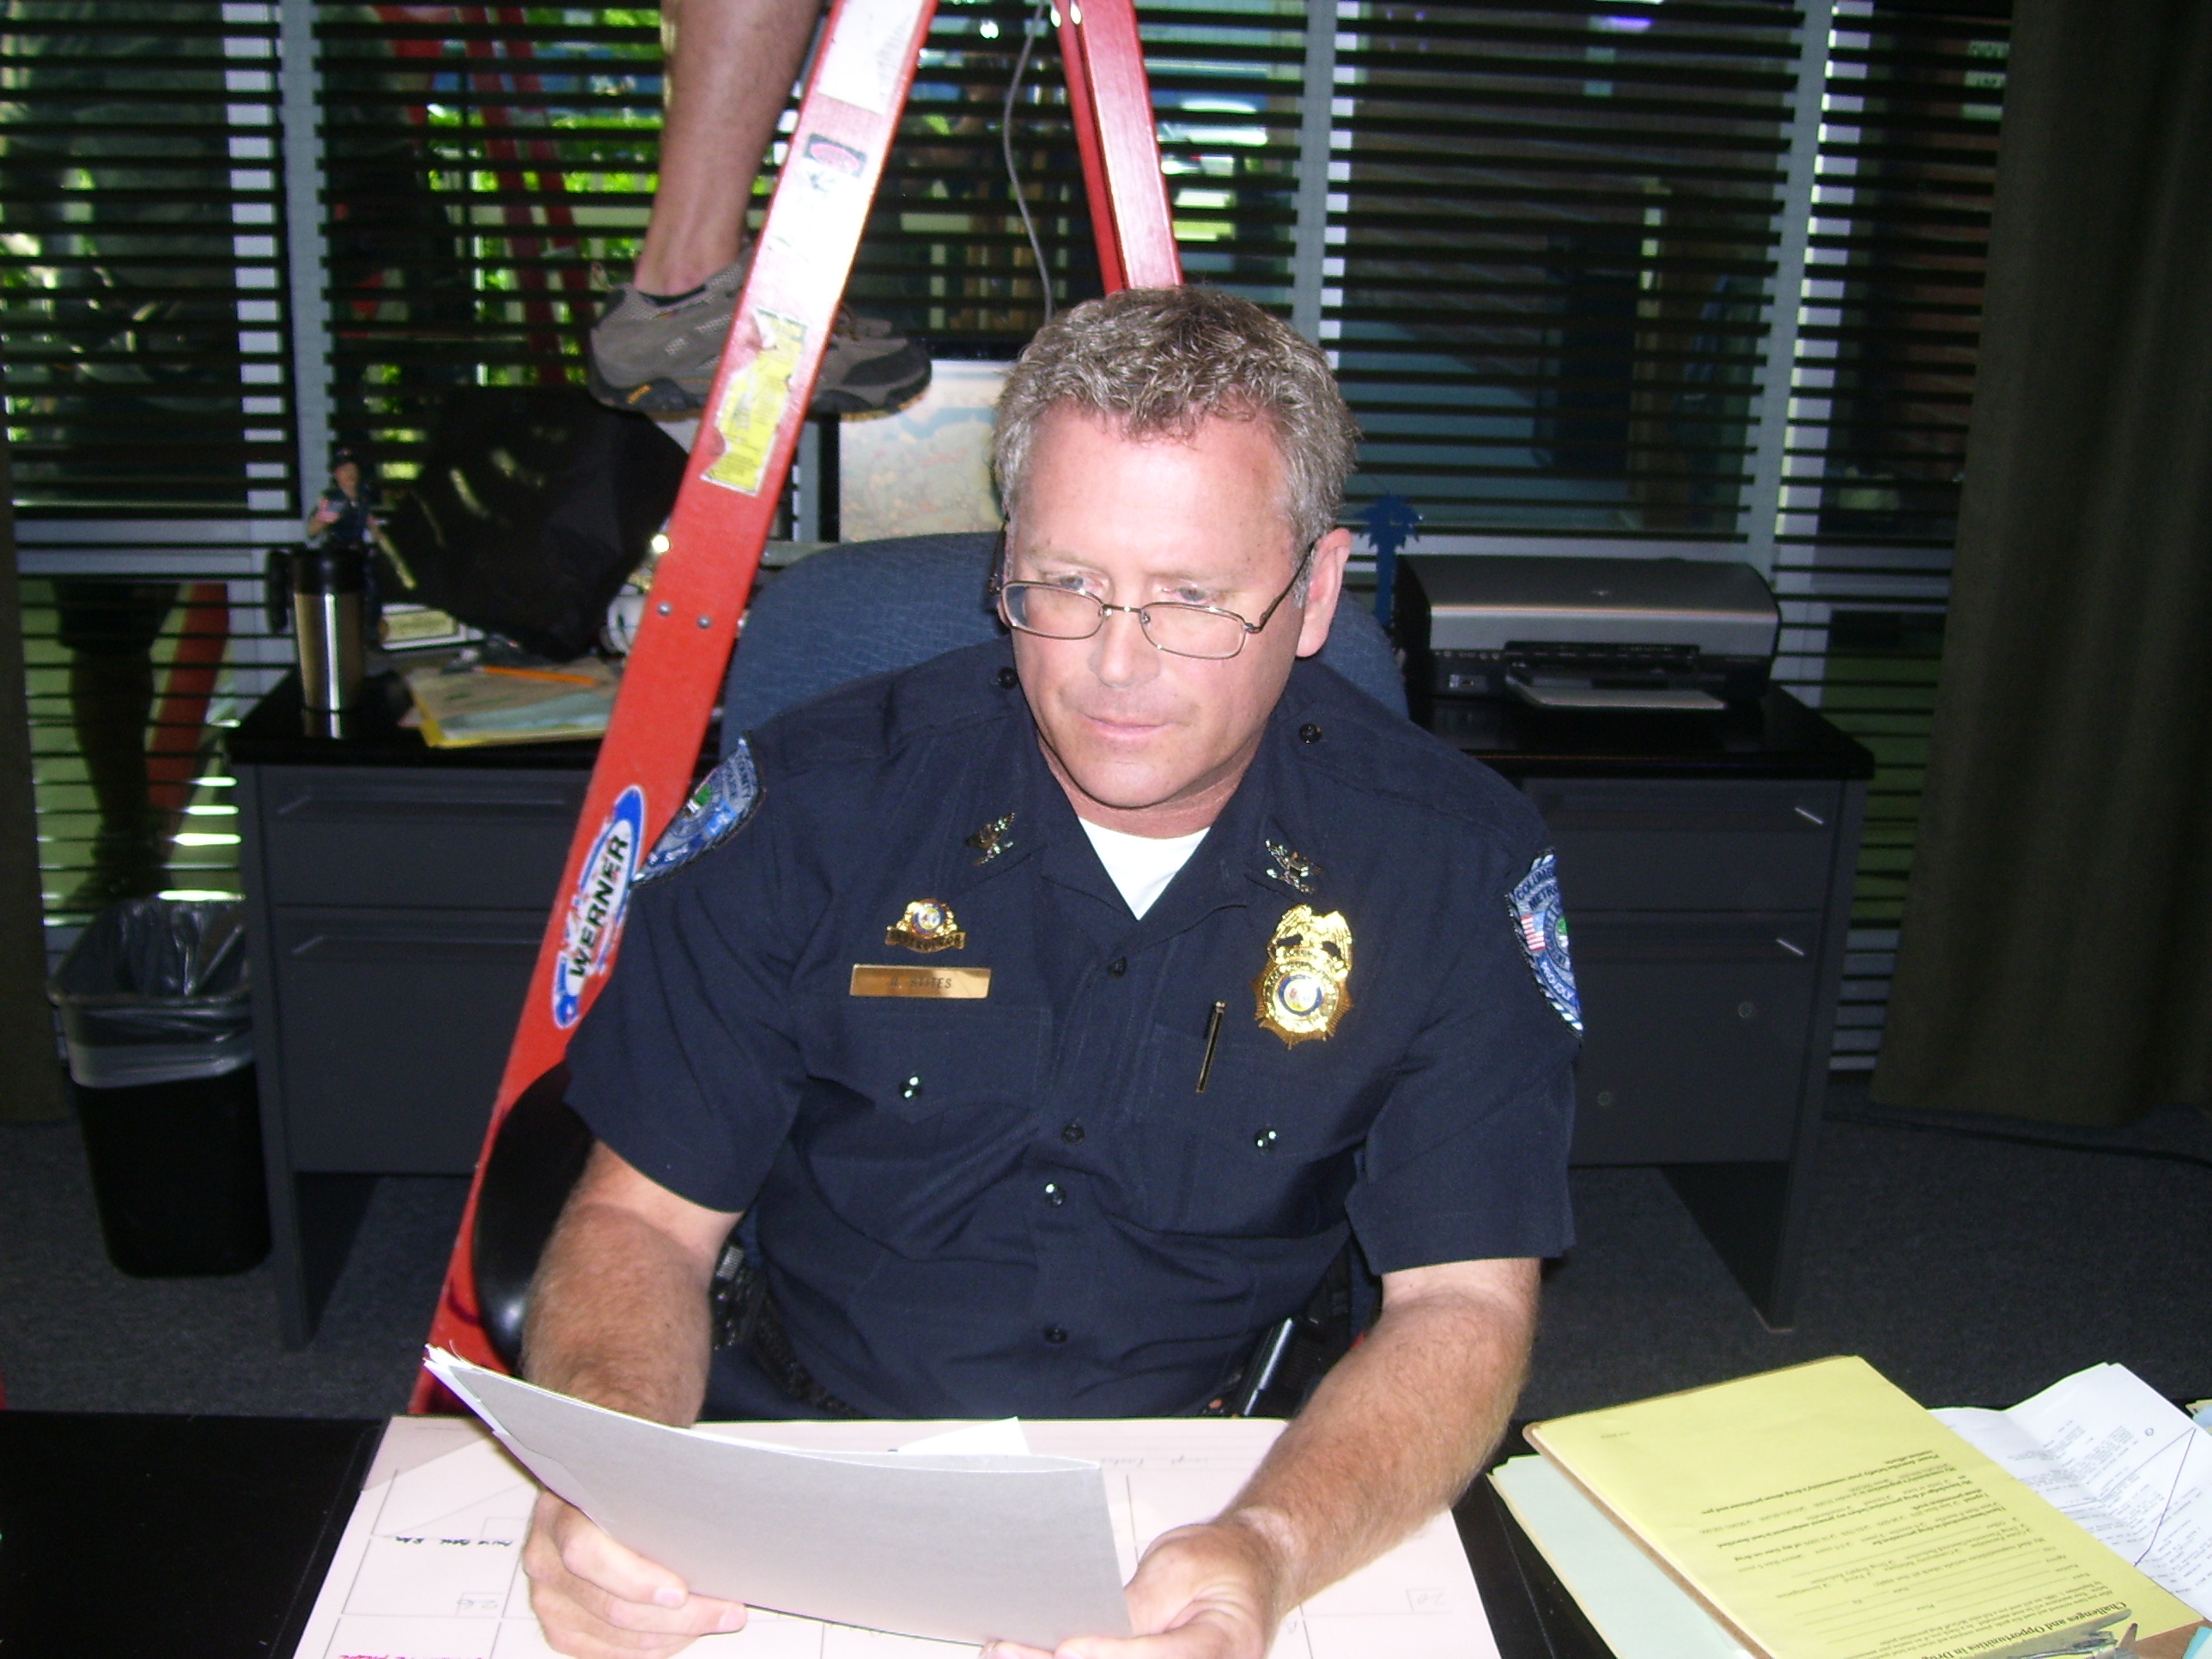 Tony Senzamici as Police Chief Stites on the set of Army Wives Episode 513 Farewell To Arms